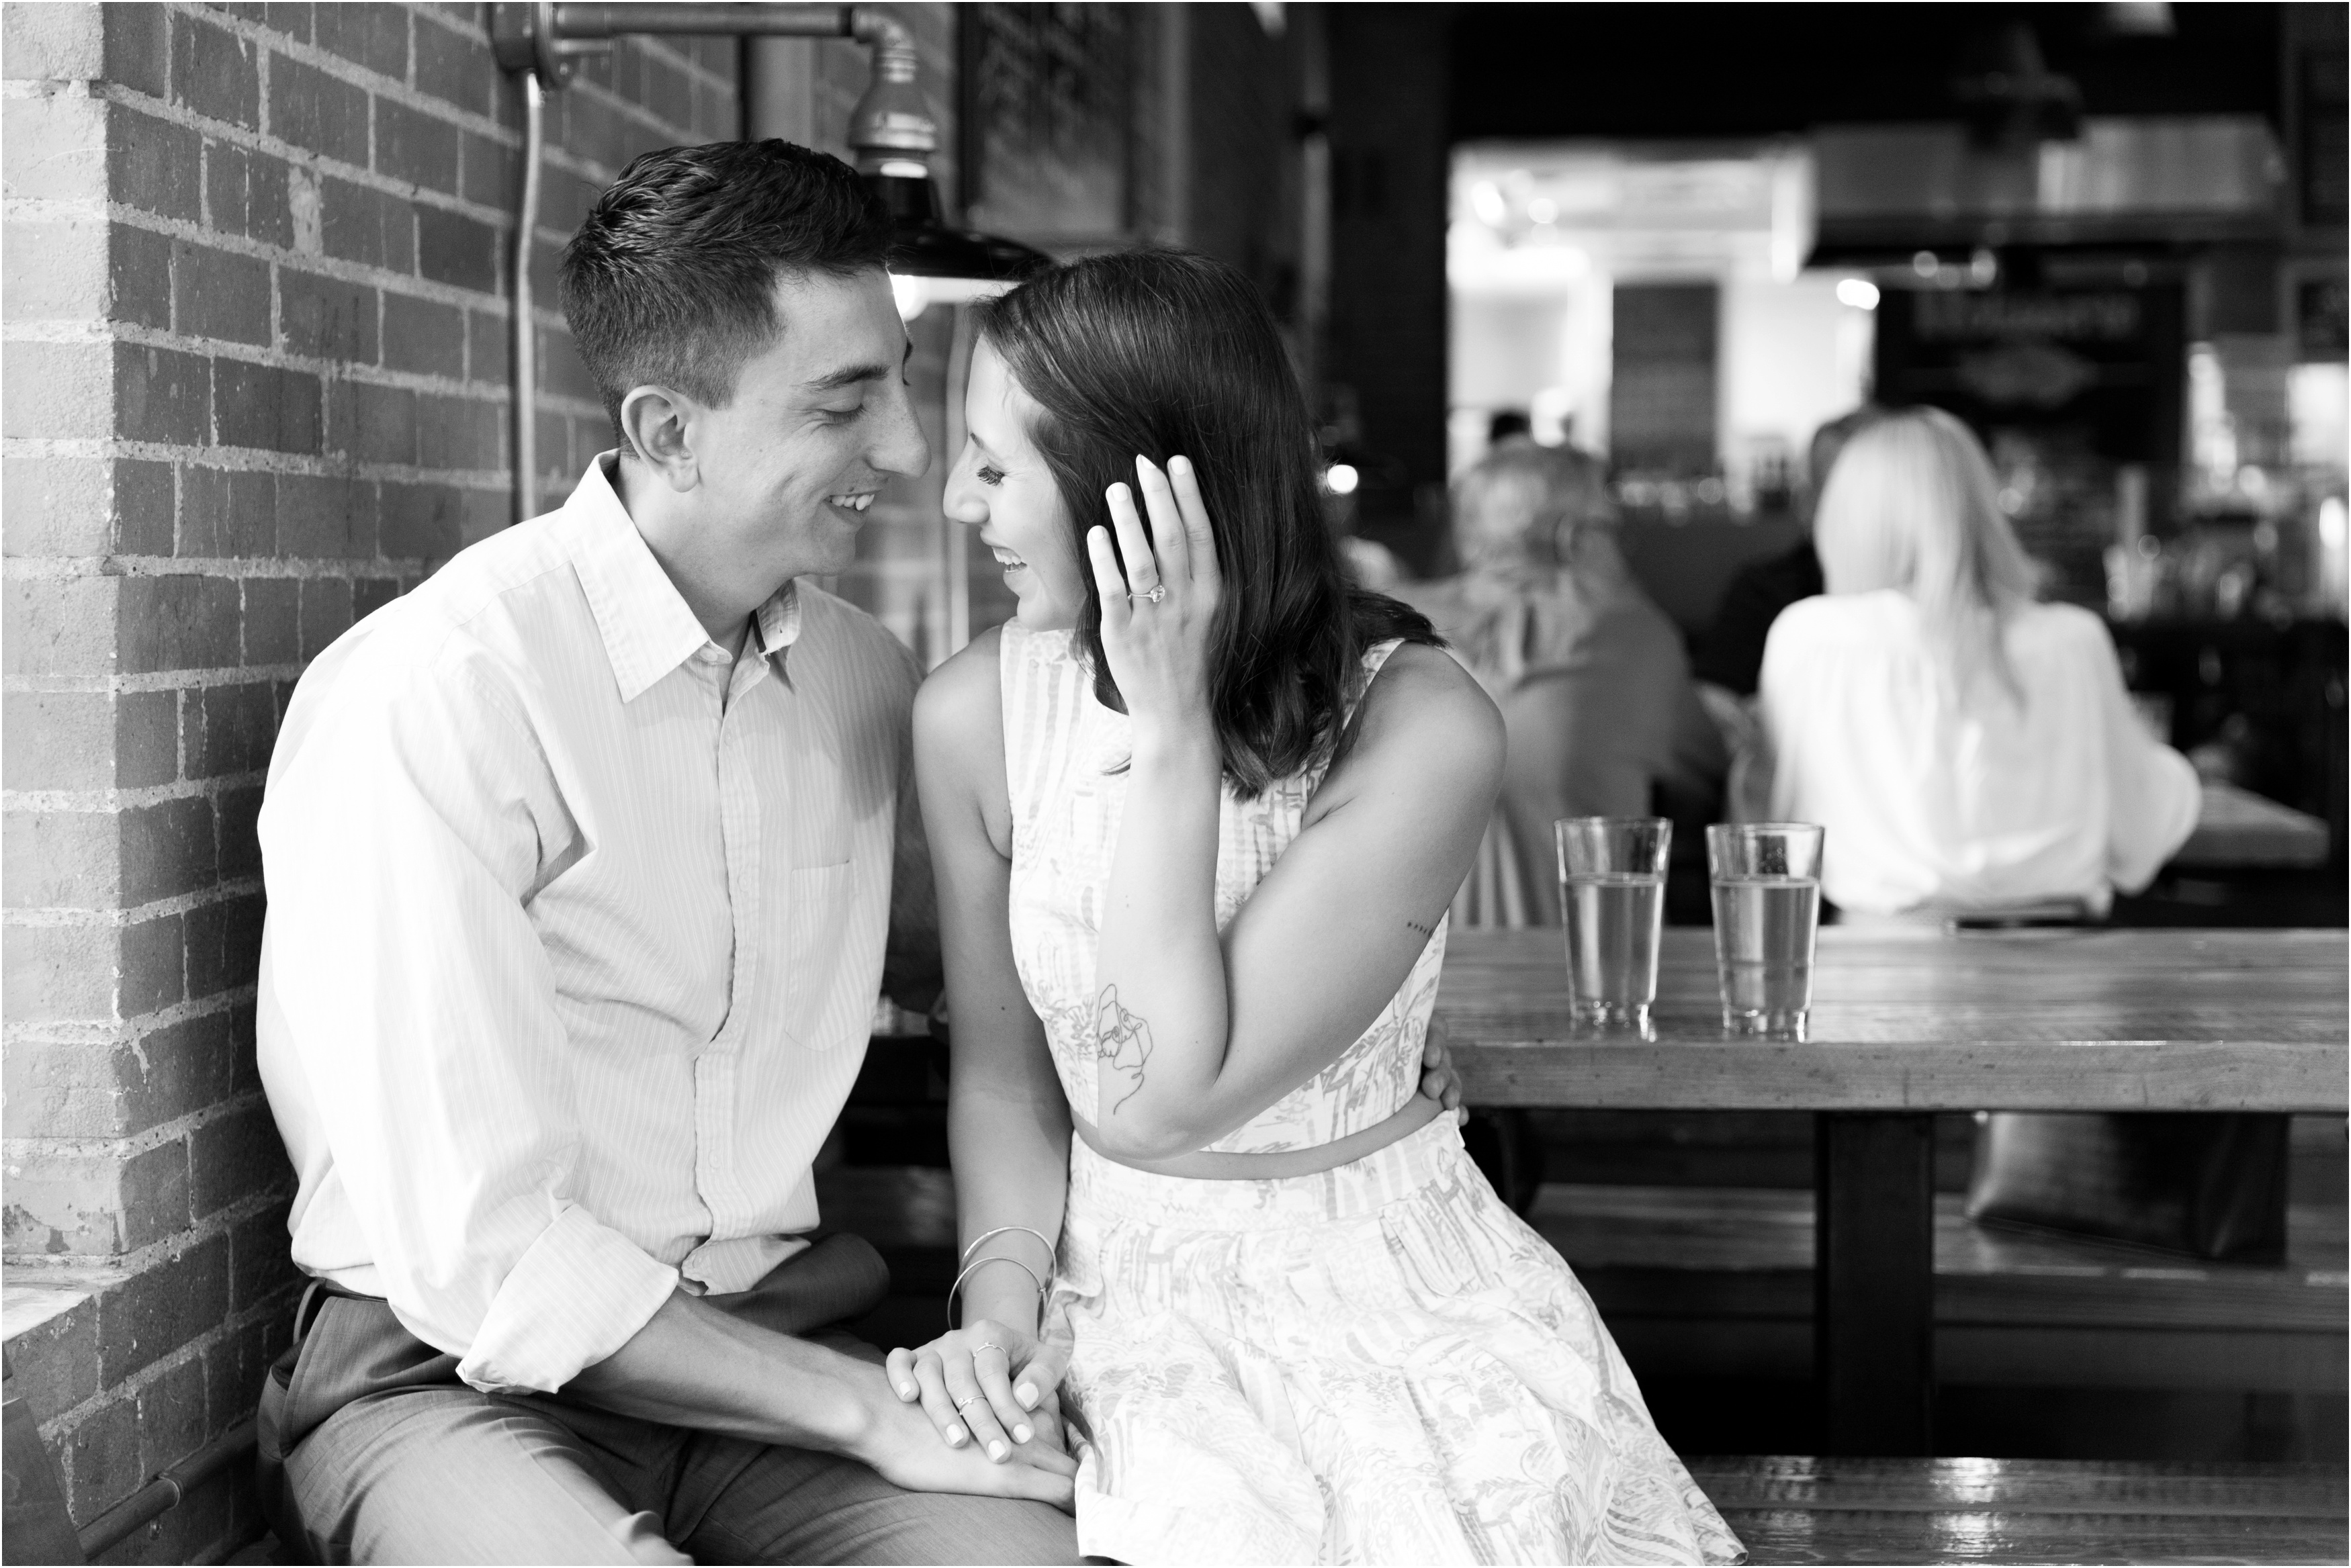 Black and white photo of a couple at a bar